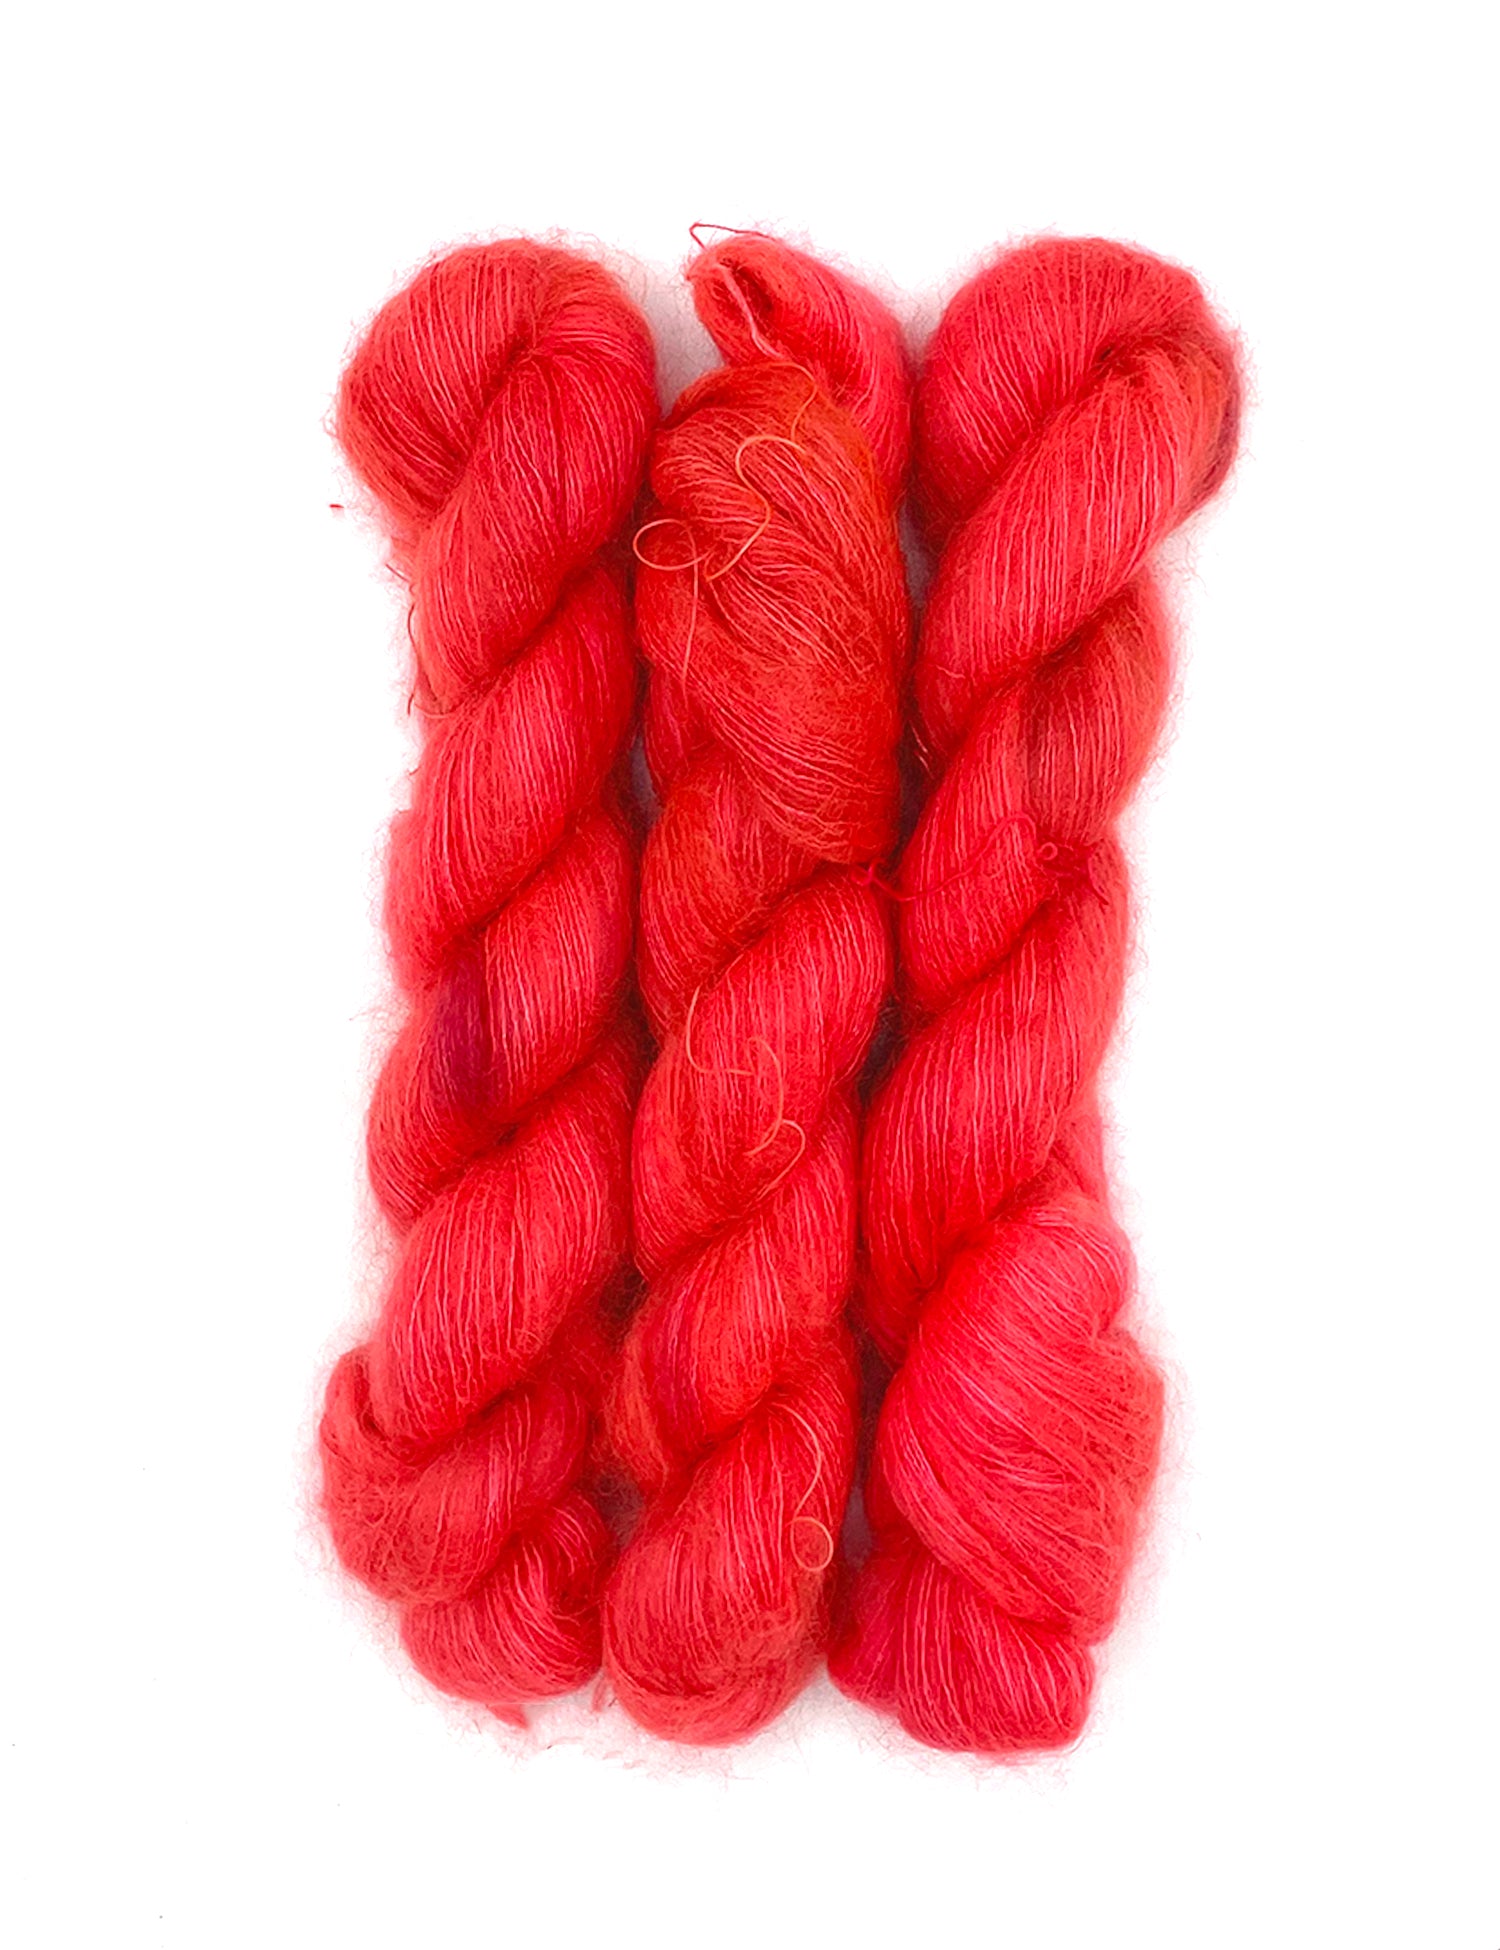 North Ave Fingering/Sport by Plied Yarn Co - On Sale! - Colorful